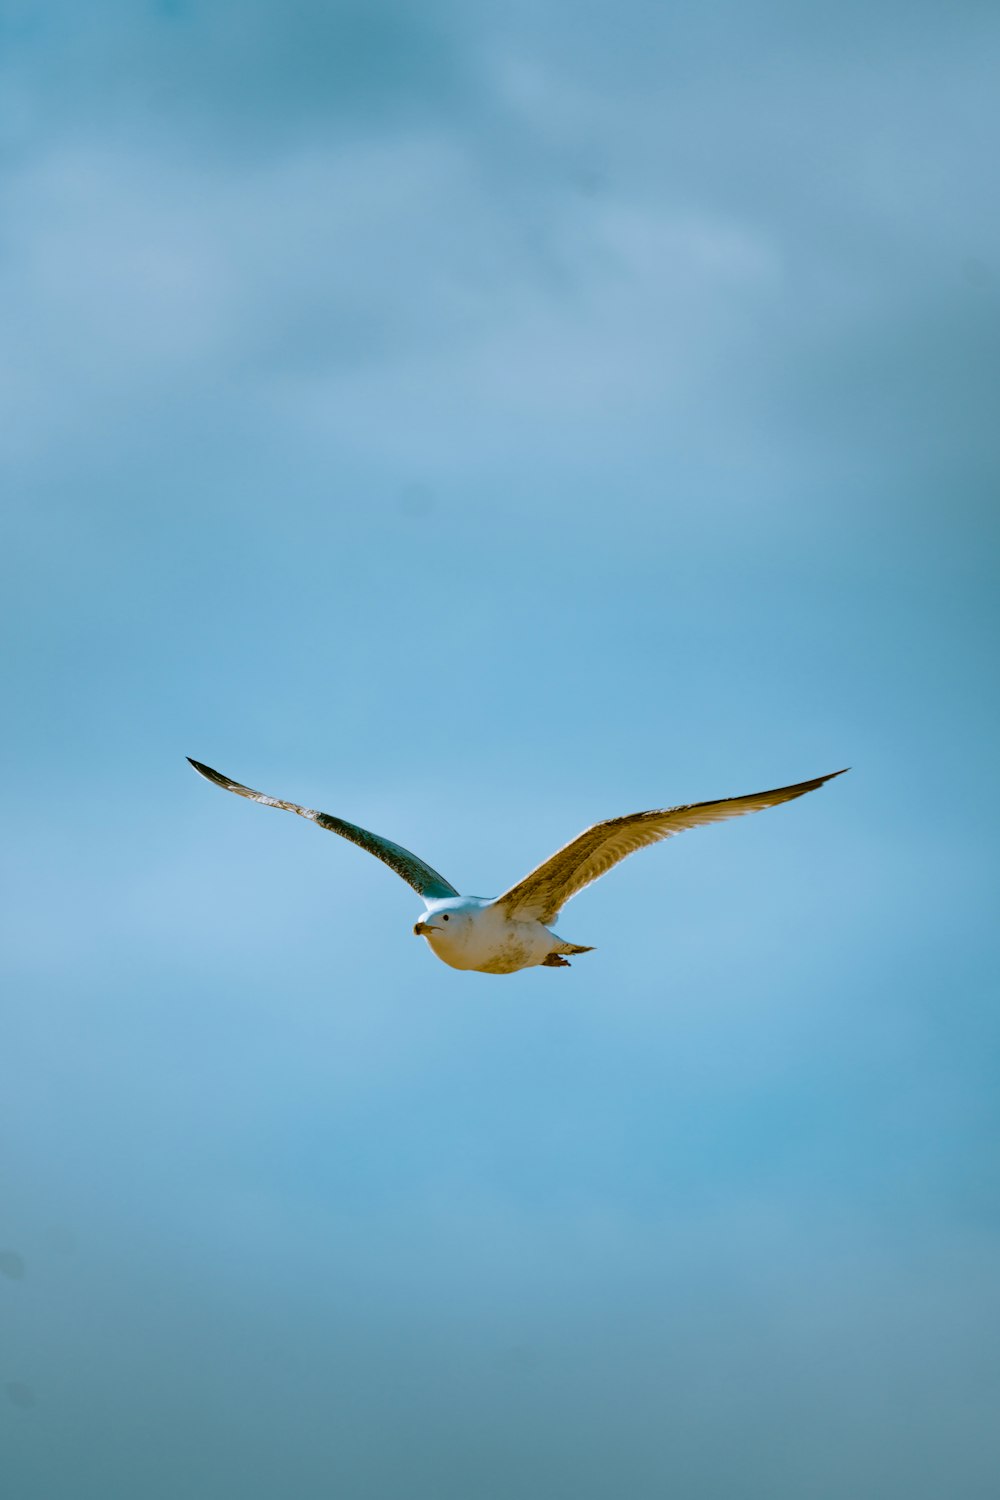 white and black bird flying under white clouds during daytime